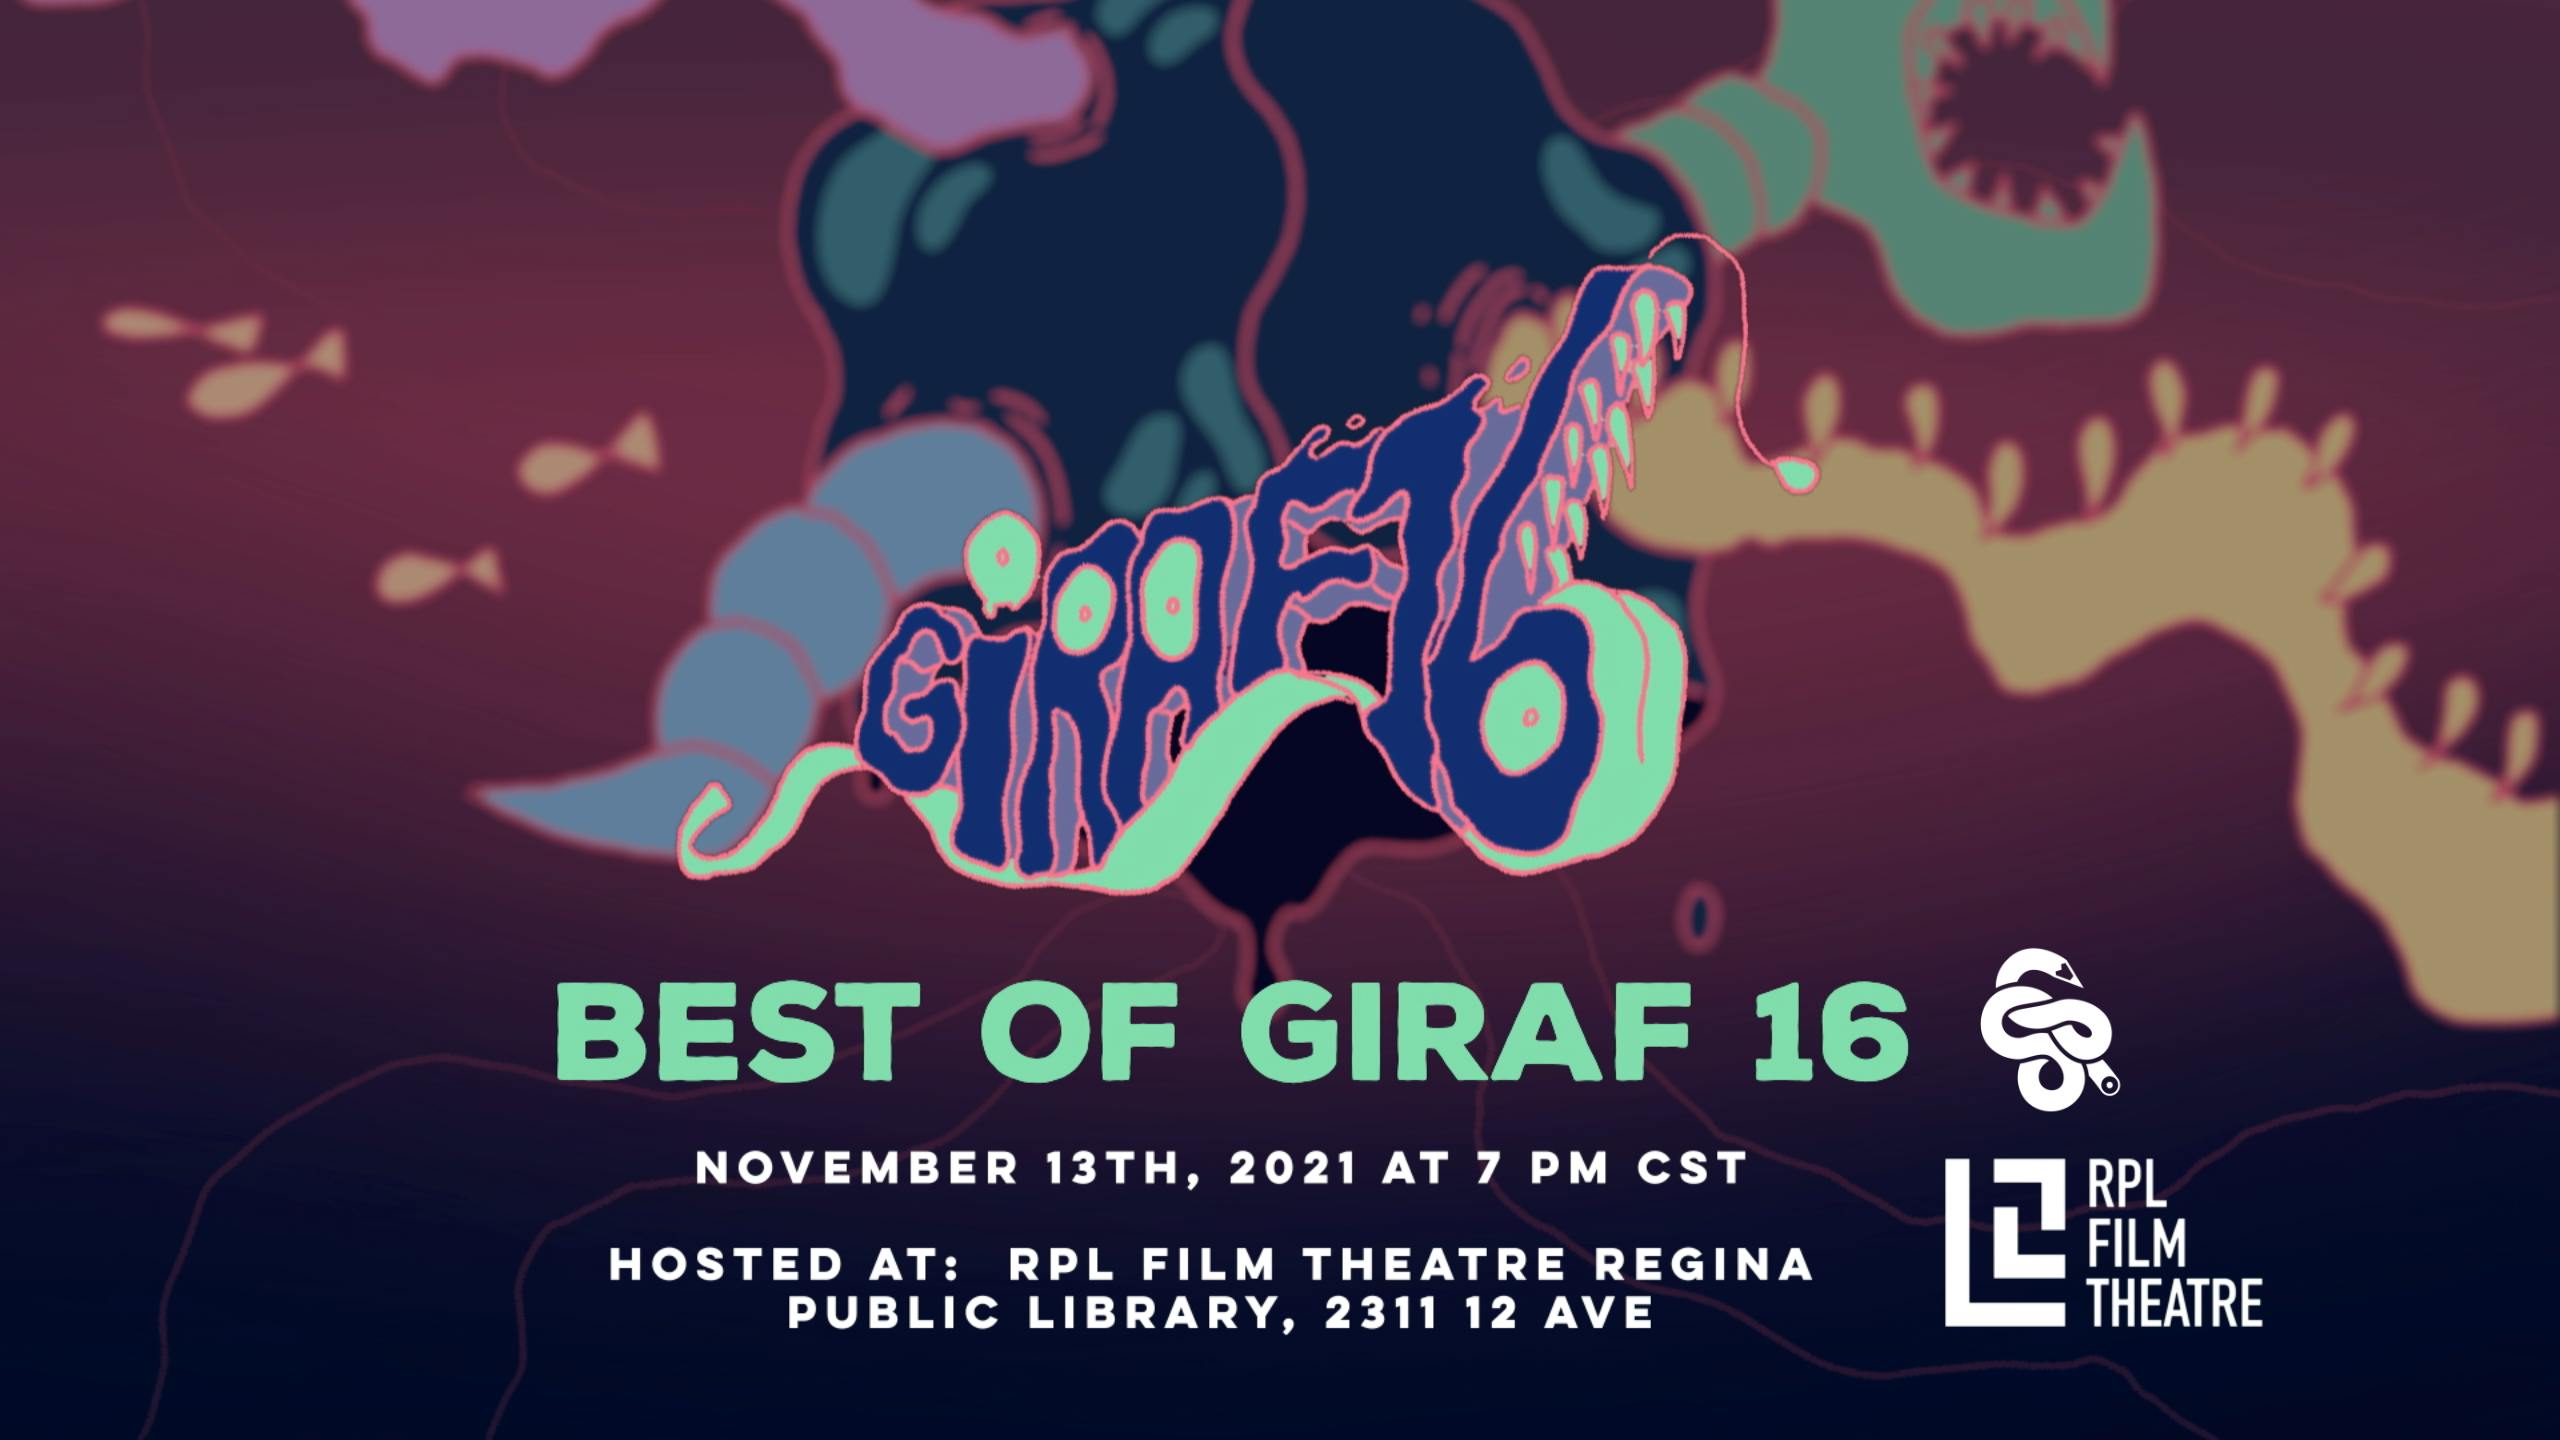 The GIRAF16 logo with text reading Best of GIRAF 16, November 13th, 2021 at 7pm CST, hosted at RPL Film Theatre Regina Public Library, 2311 12 Ave